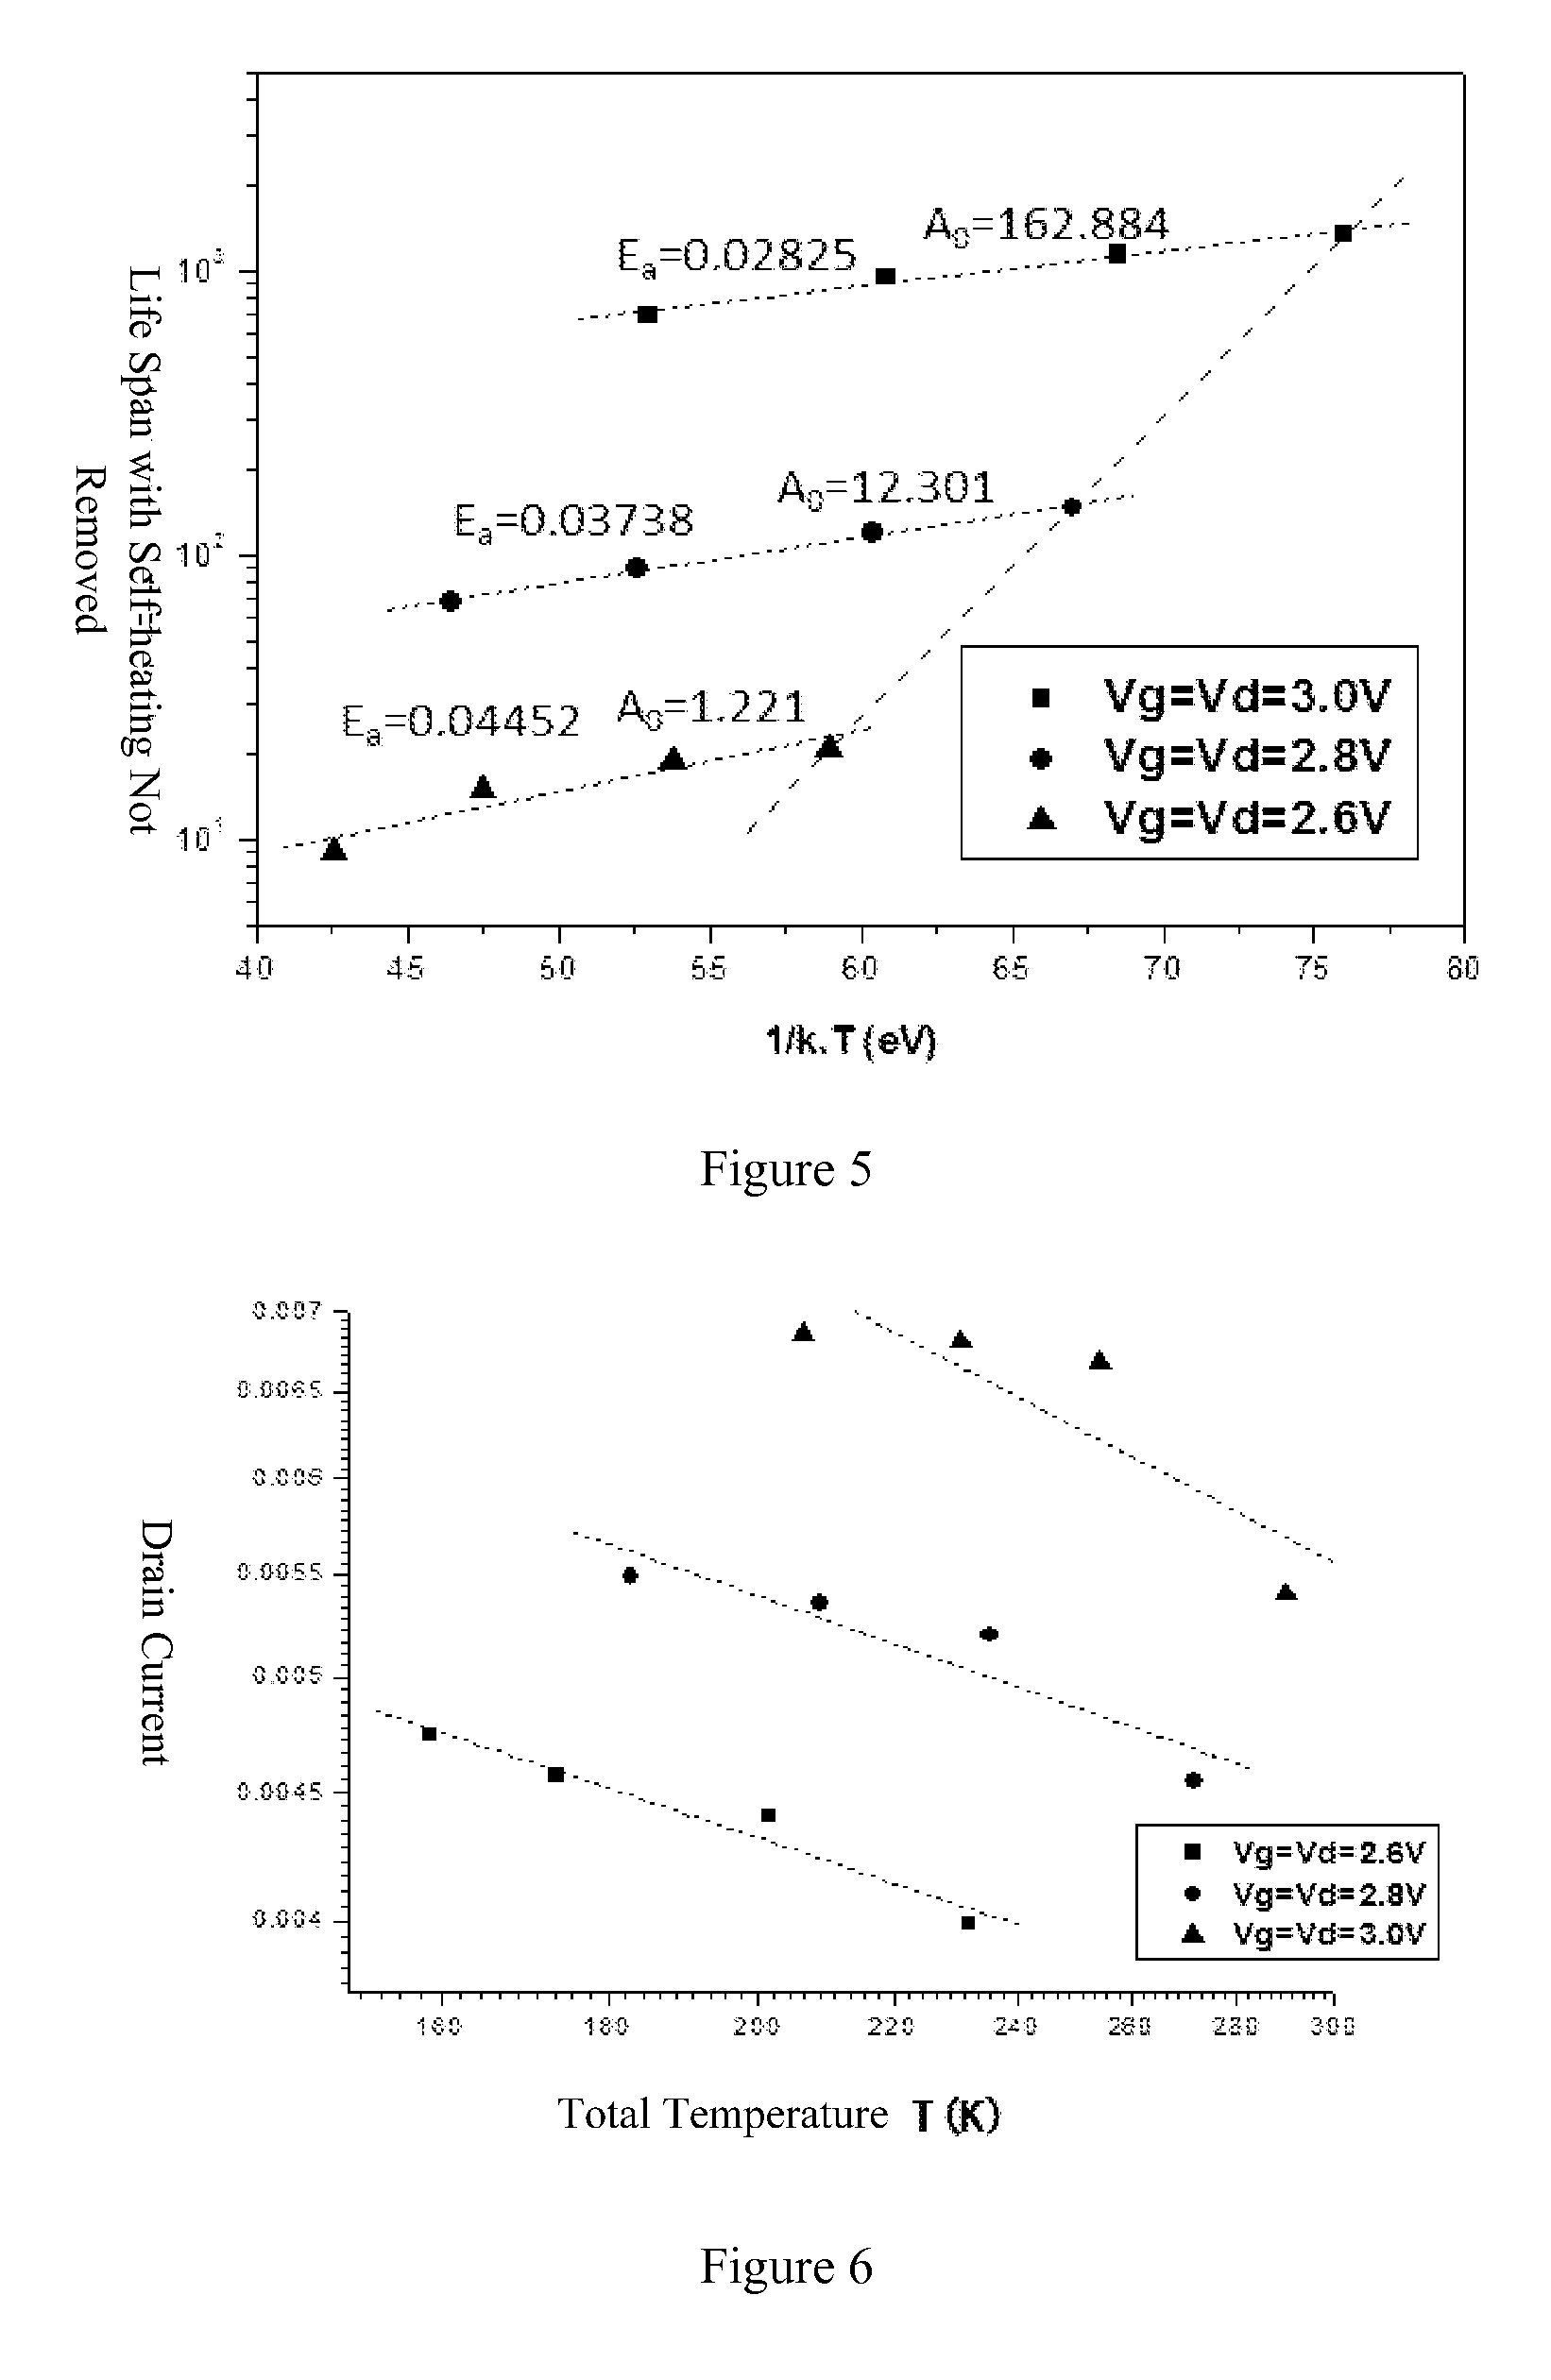 Method for Predicting Reliable Lifetime of SOI Mosfet Device